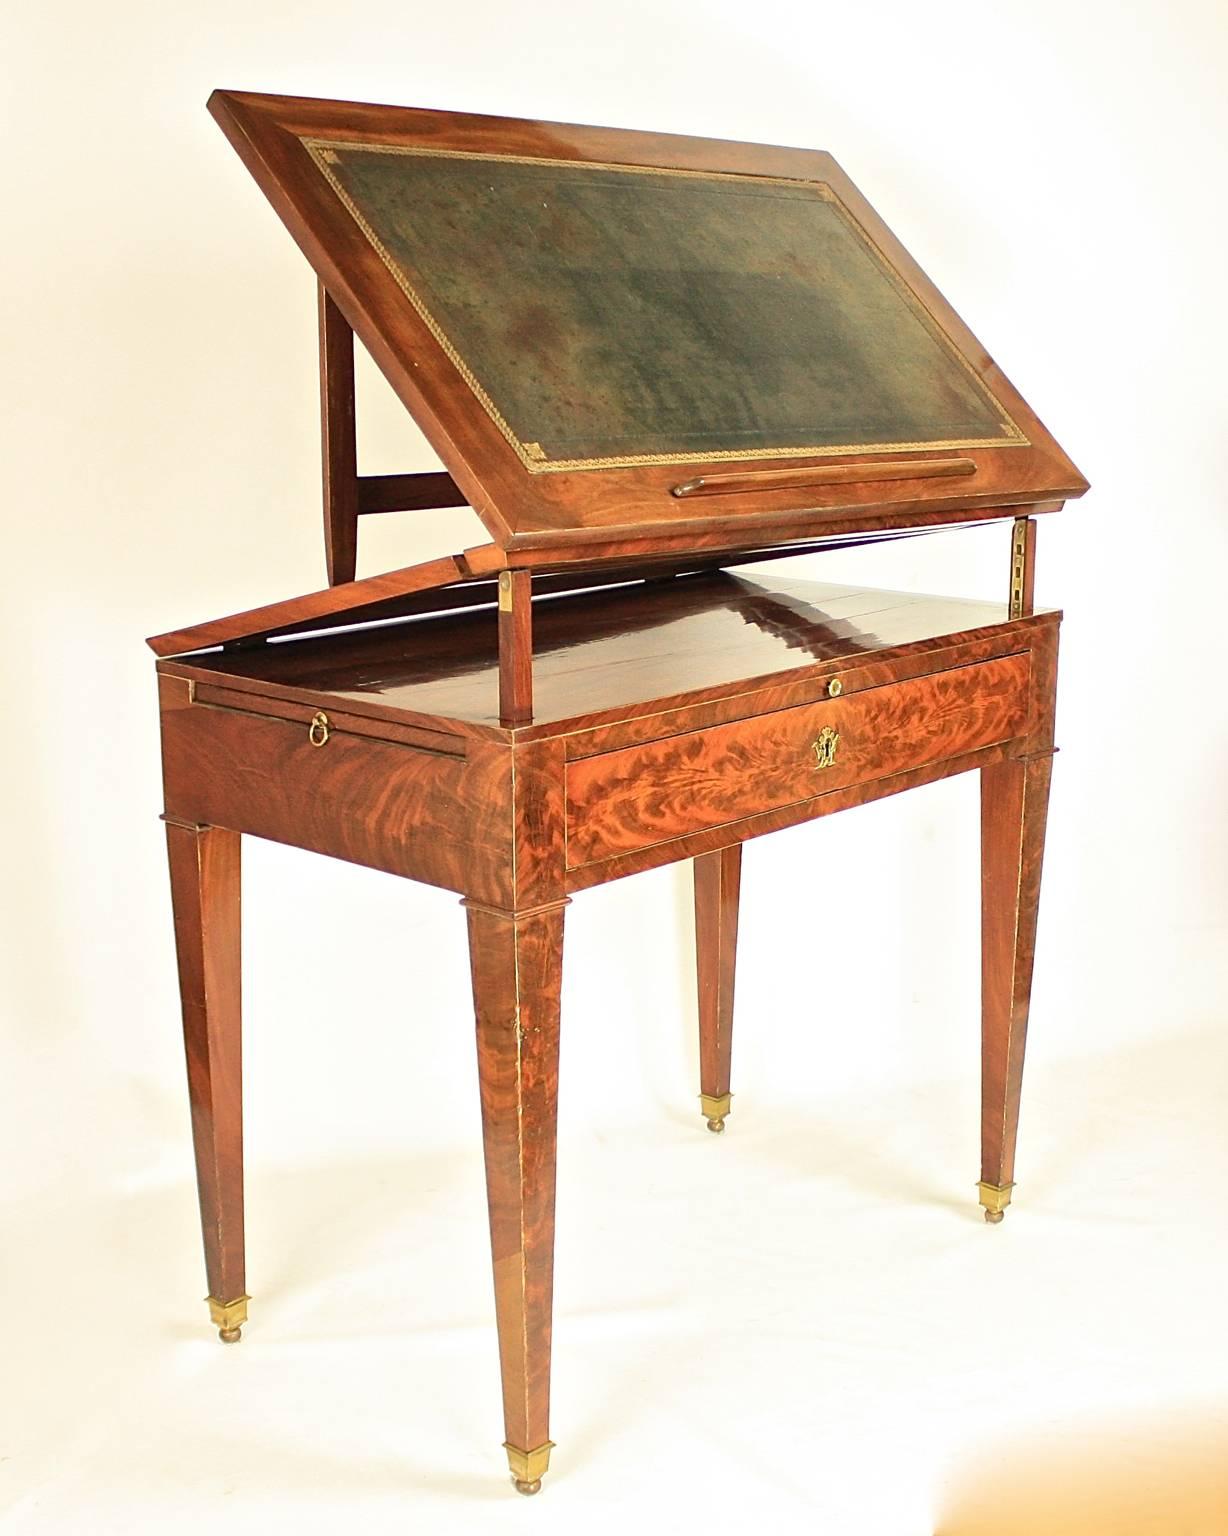 A late 18th century Directoire mahogany architect's table, attributed to the workshop of  Jean-Joseph Chapuis. 

A mechanical table with a double-hinged ratcheted top and a gilt-tooled green leather lined writing surface, veneered in beautifully